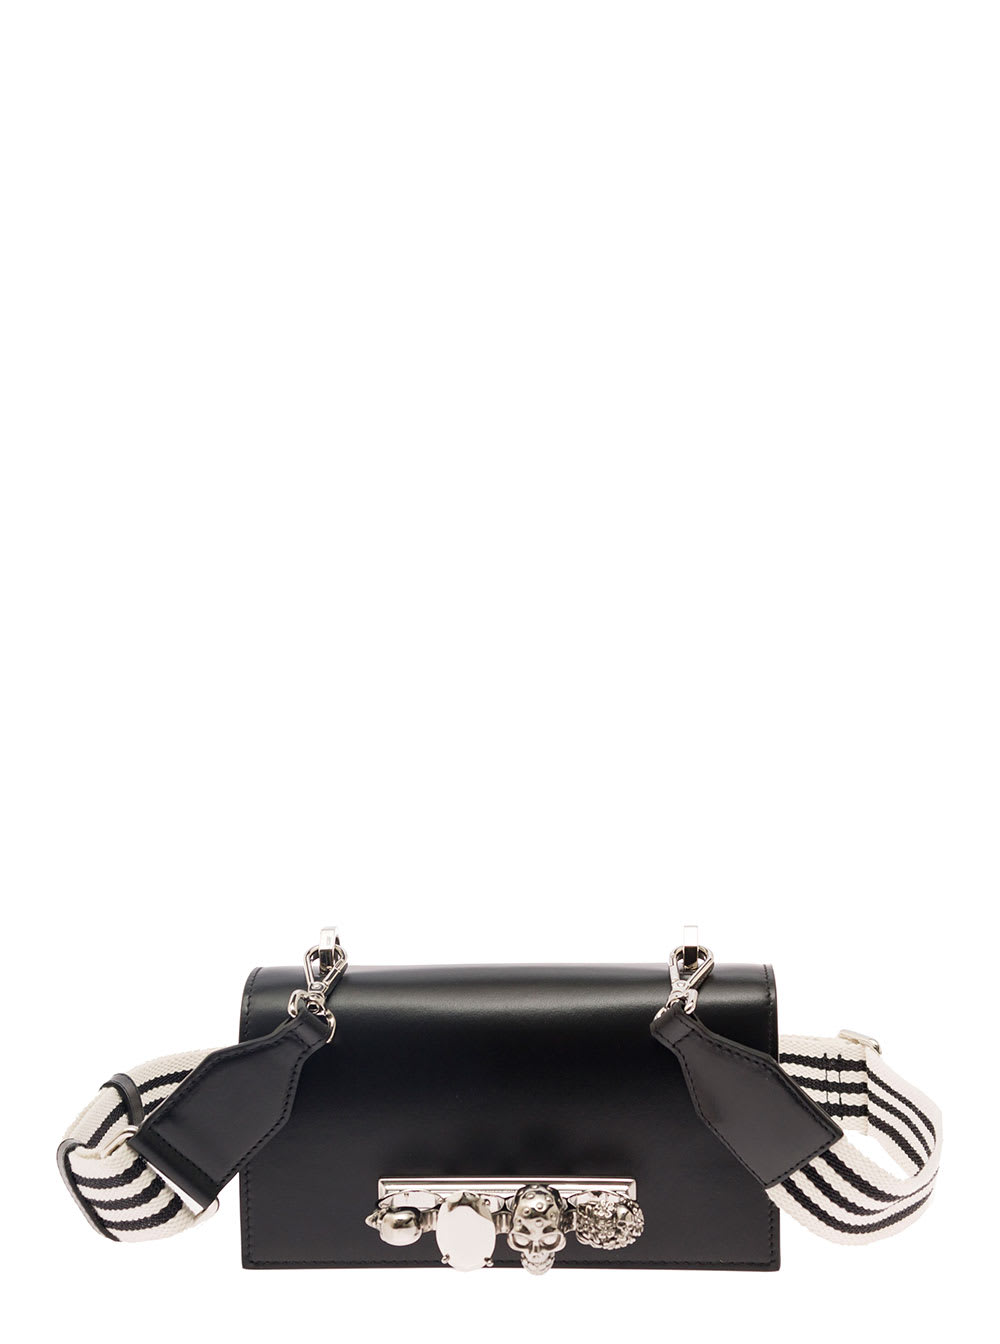 Alexander Mcqueen The Knuckle Satchel Black Shoulder Bag With Skull And Stones In Smooth Leatrher Woman